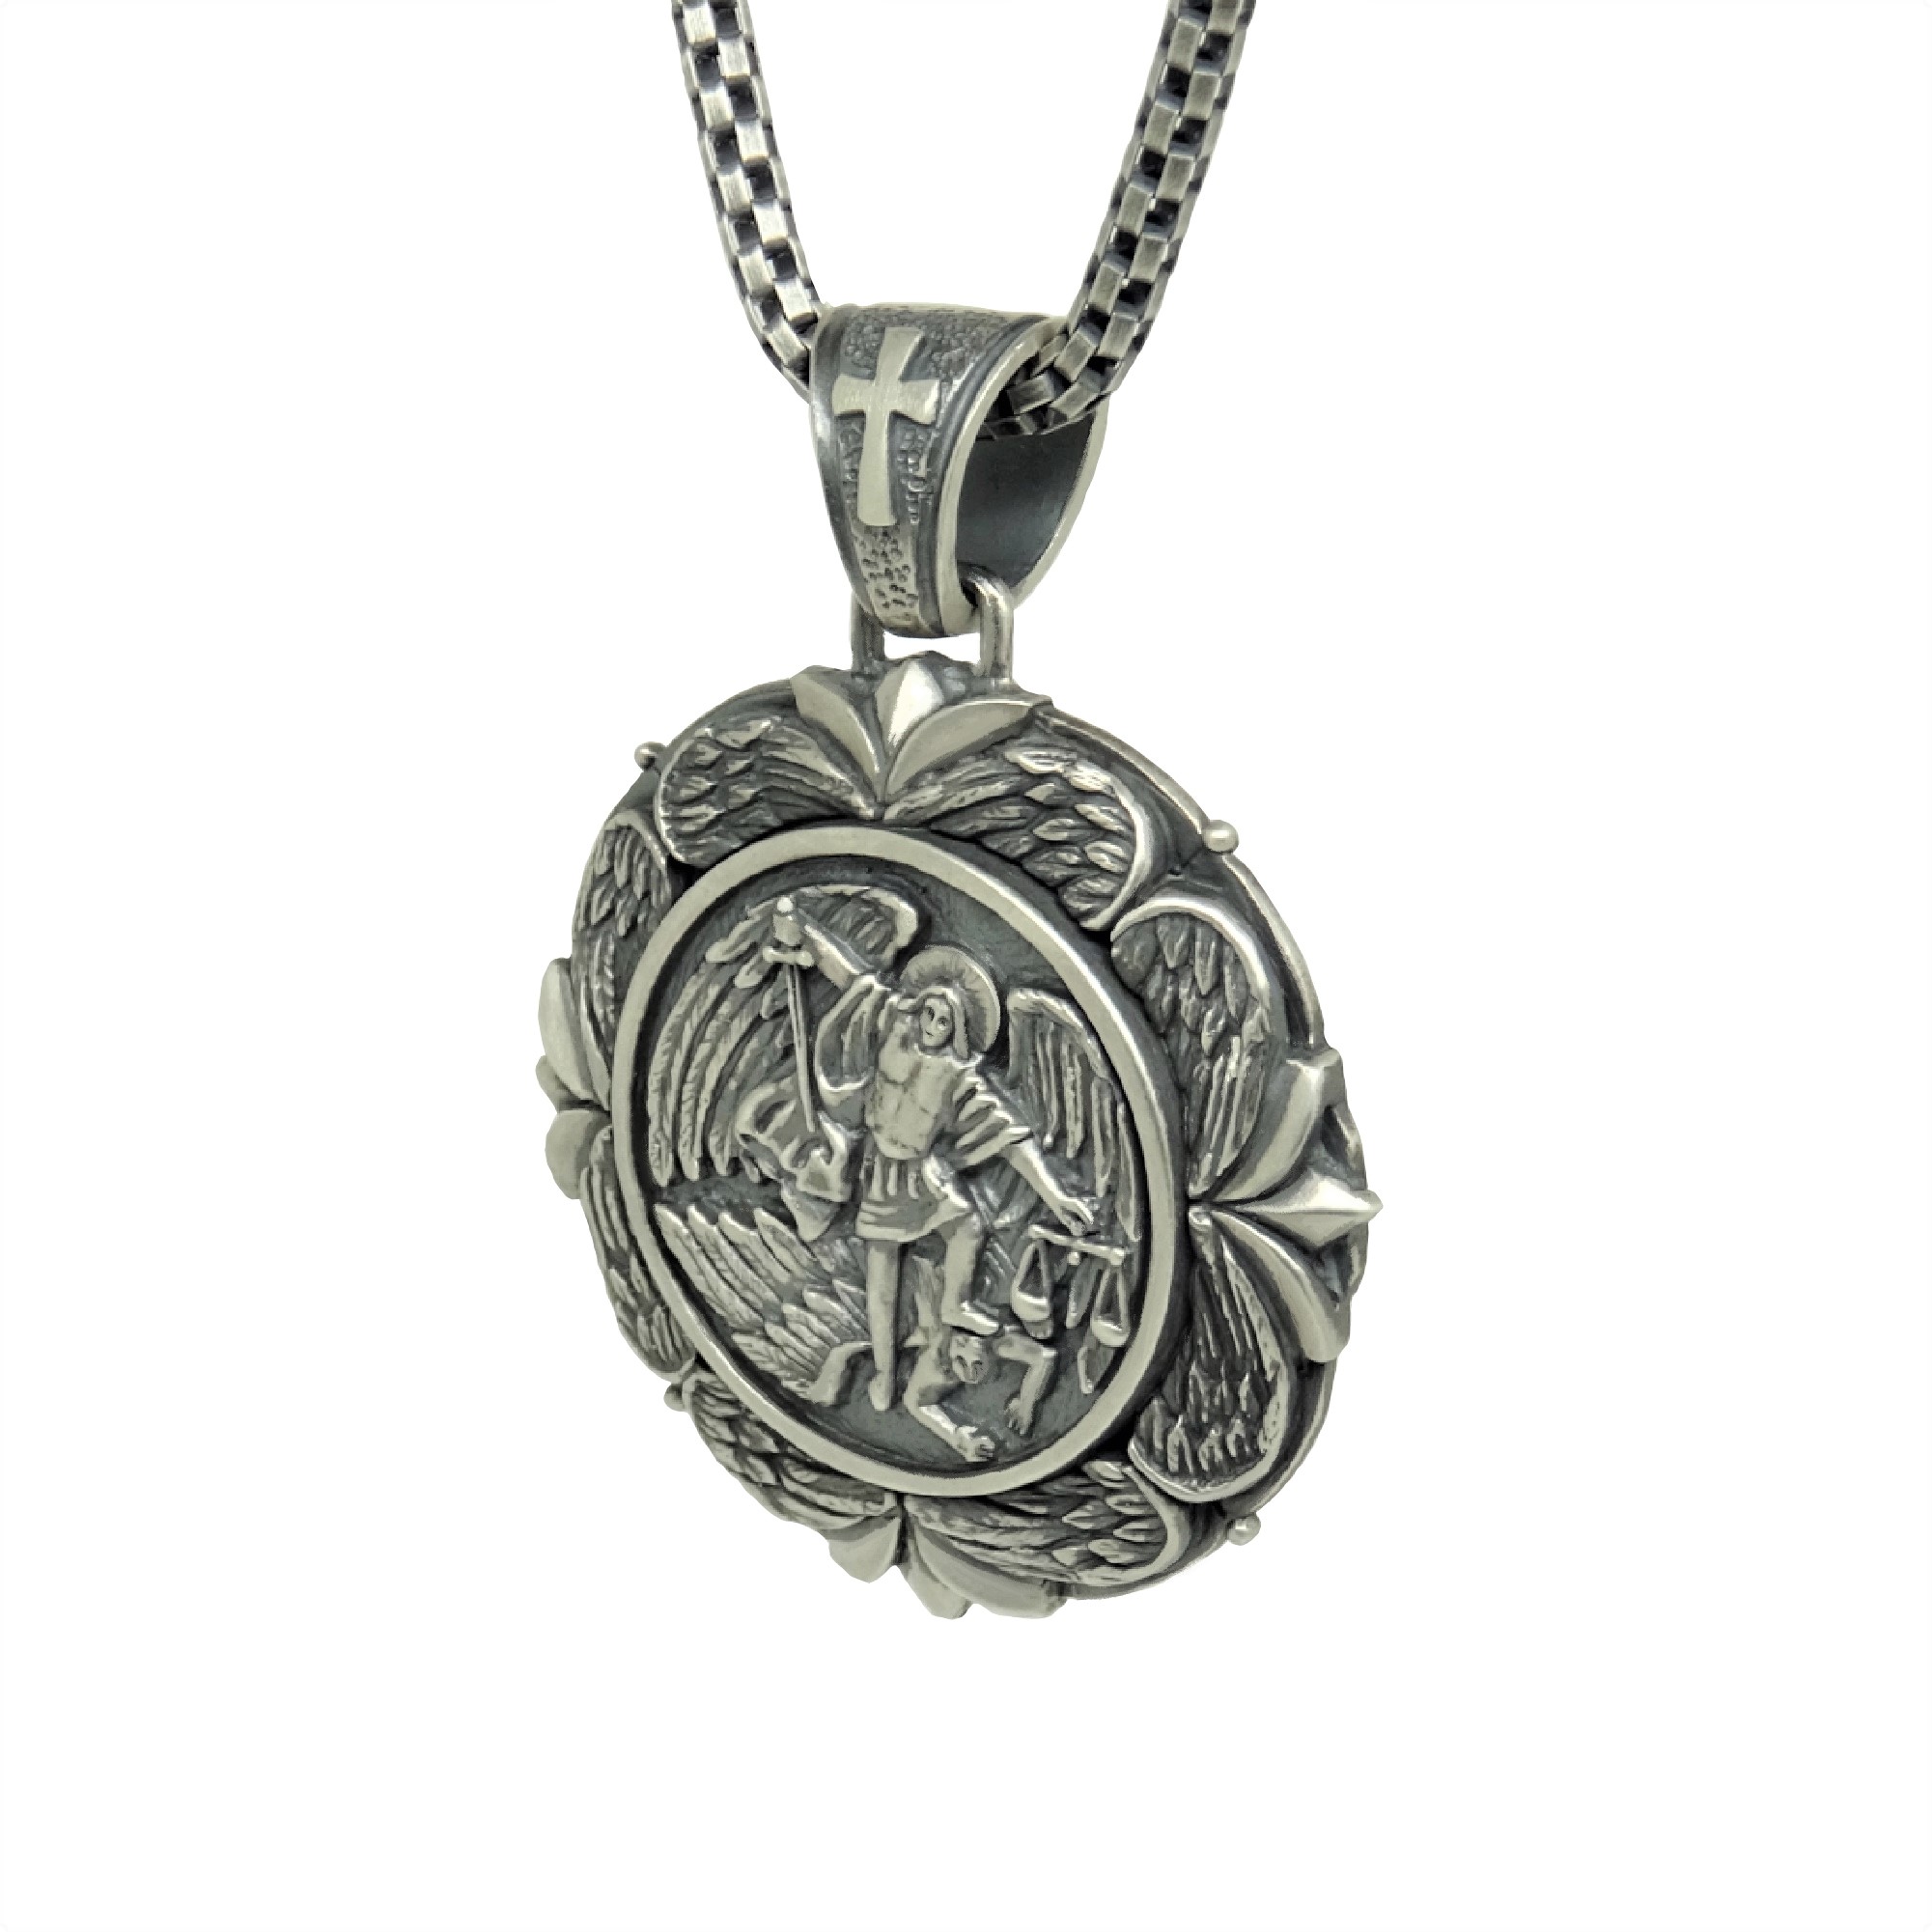 HANDCRAFTED SOLID STERLING SILVER 925 CUSTOM MADE CHRISTIAN ROMAN CATHOLIC  “SAINT MICHAEL THE ARCHANGEL” RELIGIOUS PENDANT MEDAL